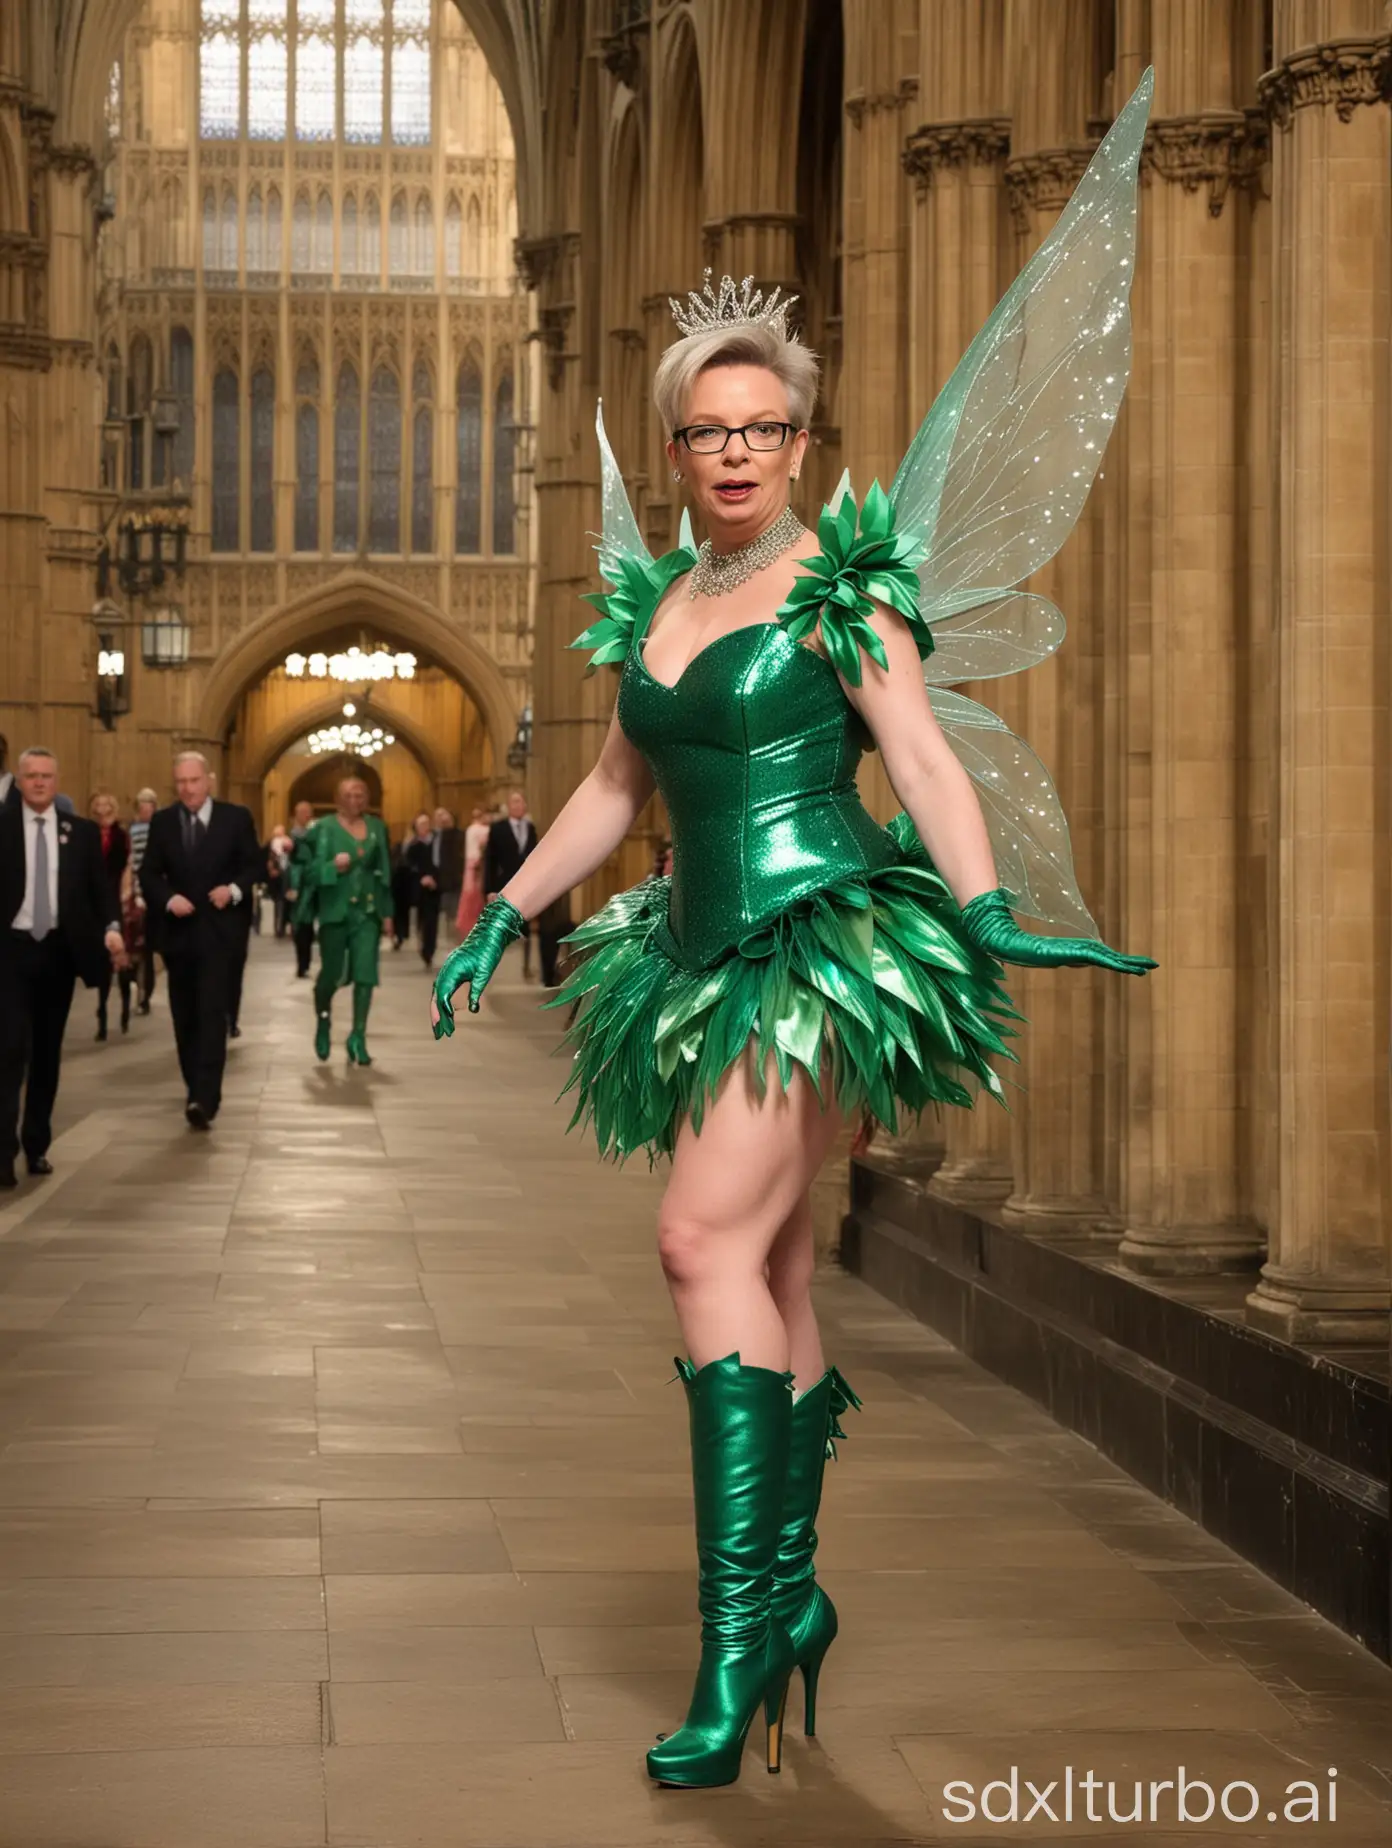 (((Political drag race))), photograph of british politician Michael Gove in an emerald Tinkerbell fairy drag queen dress and high heel boots walking in the houses of parliament